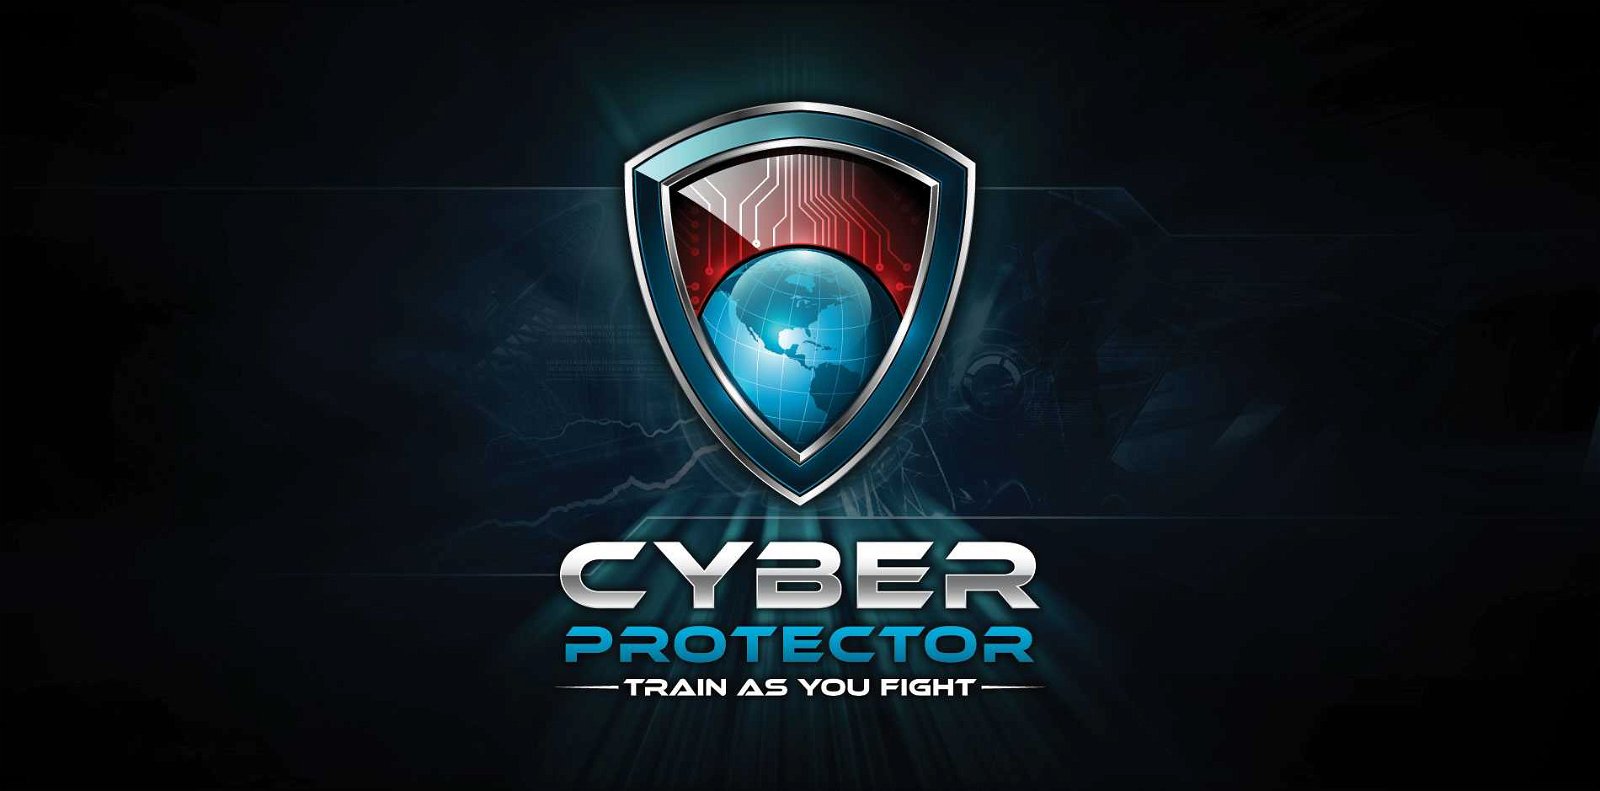 Cyber Protector 2014